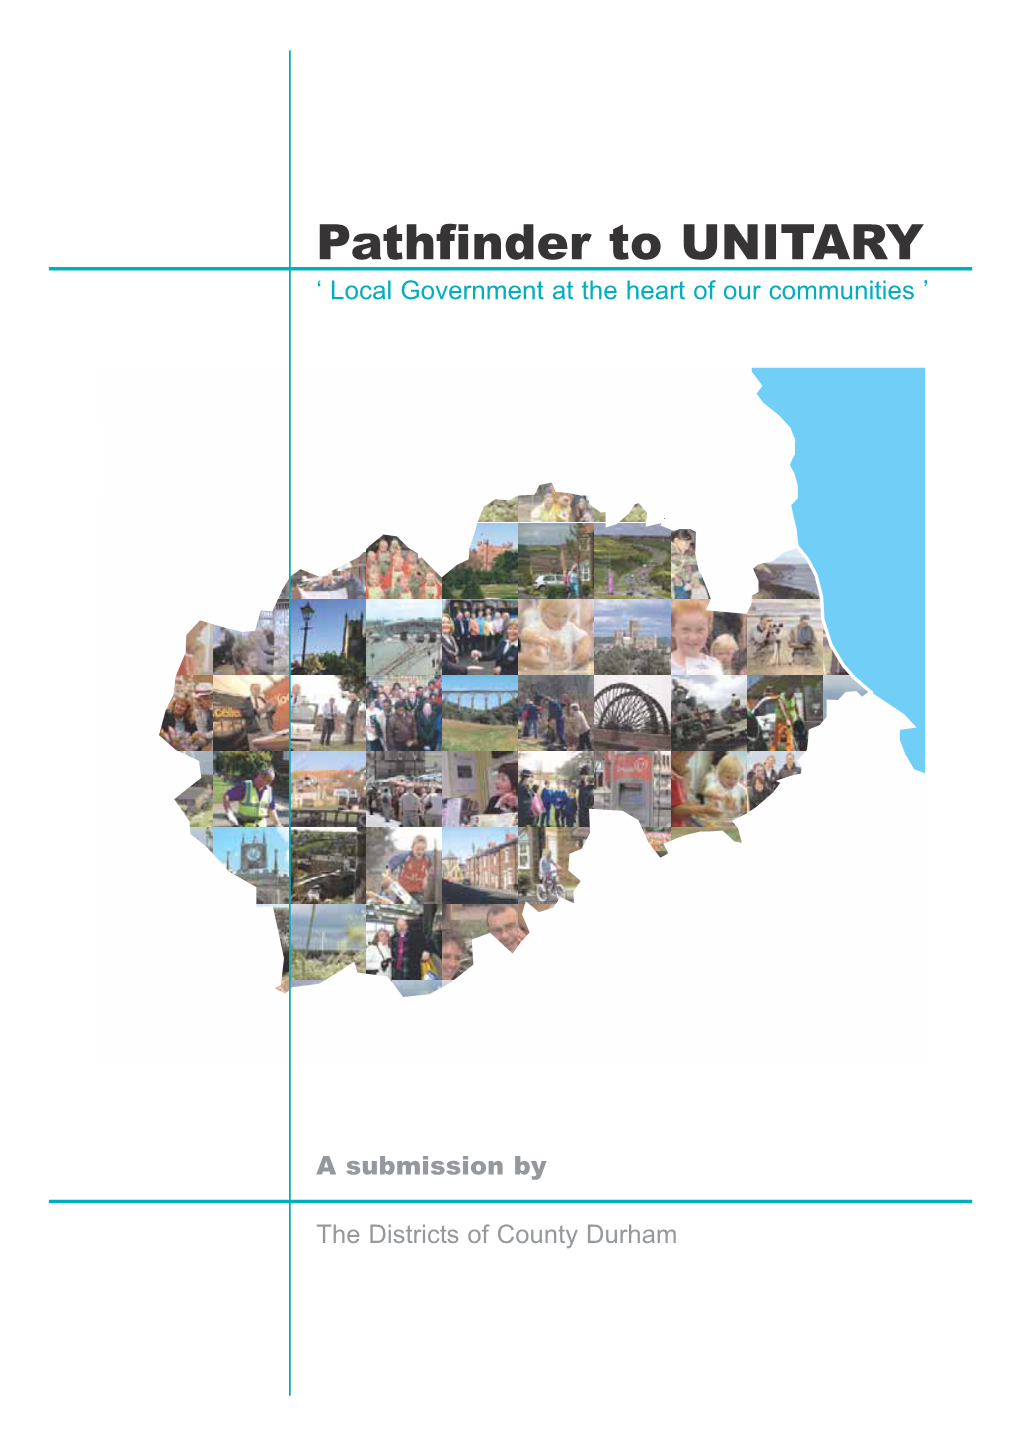 Pathfinder to UNITARY ‘ Local Government at the Heart of Our Communities ’